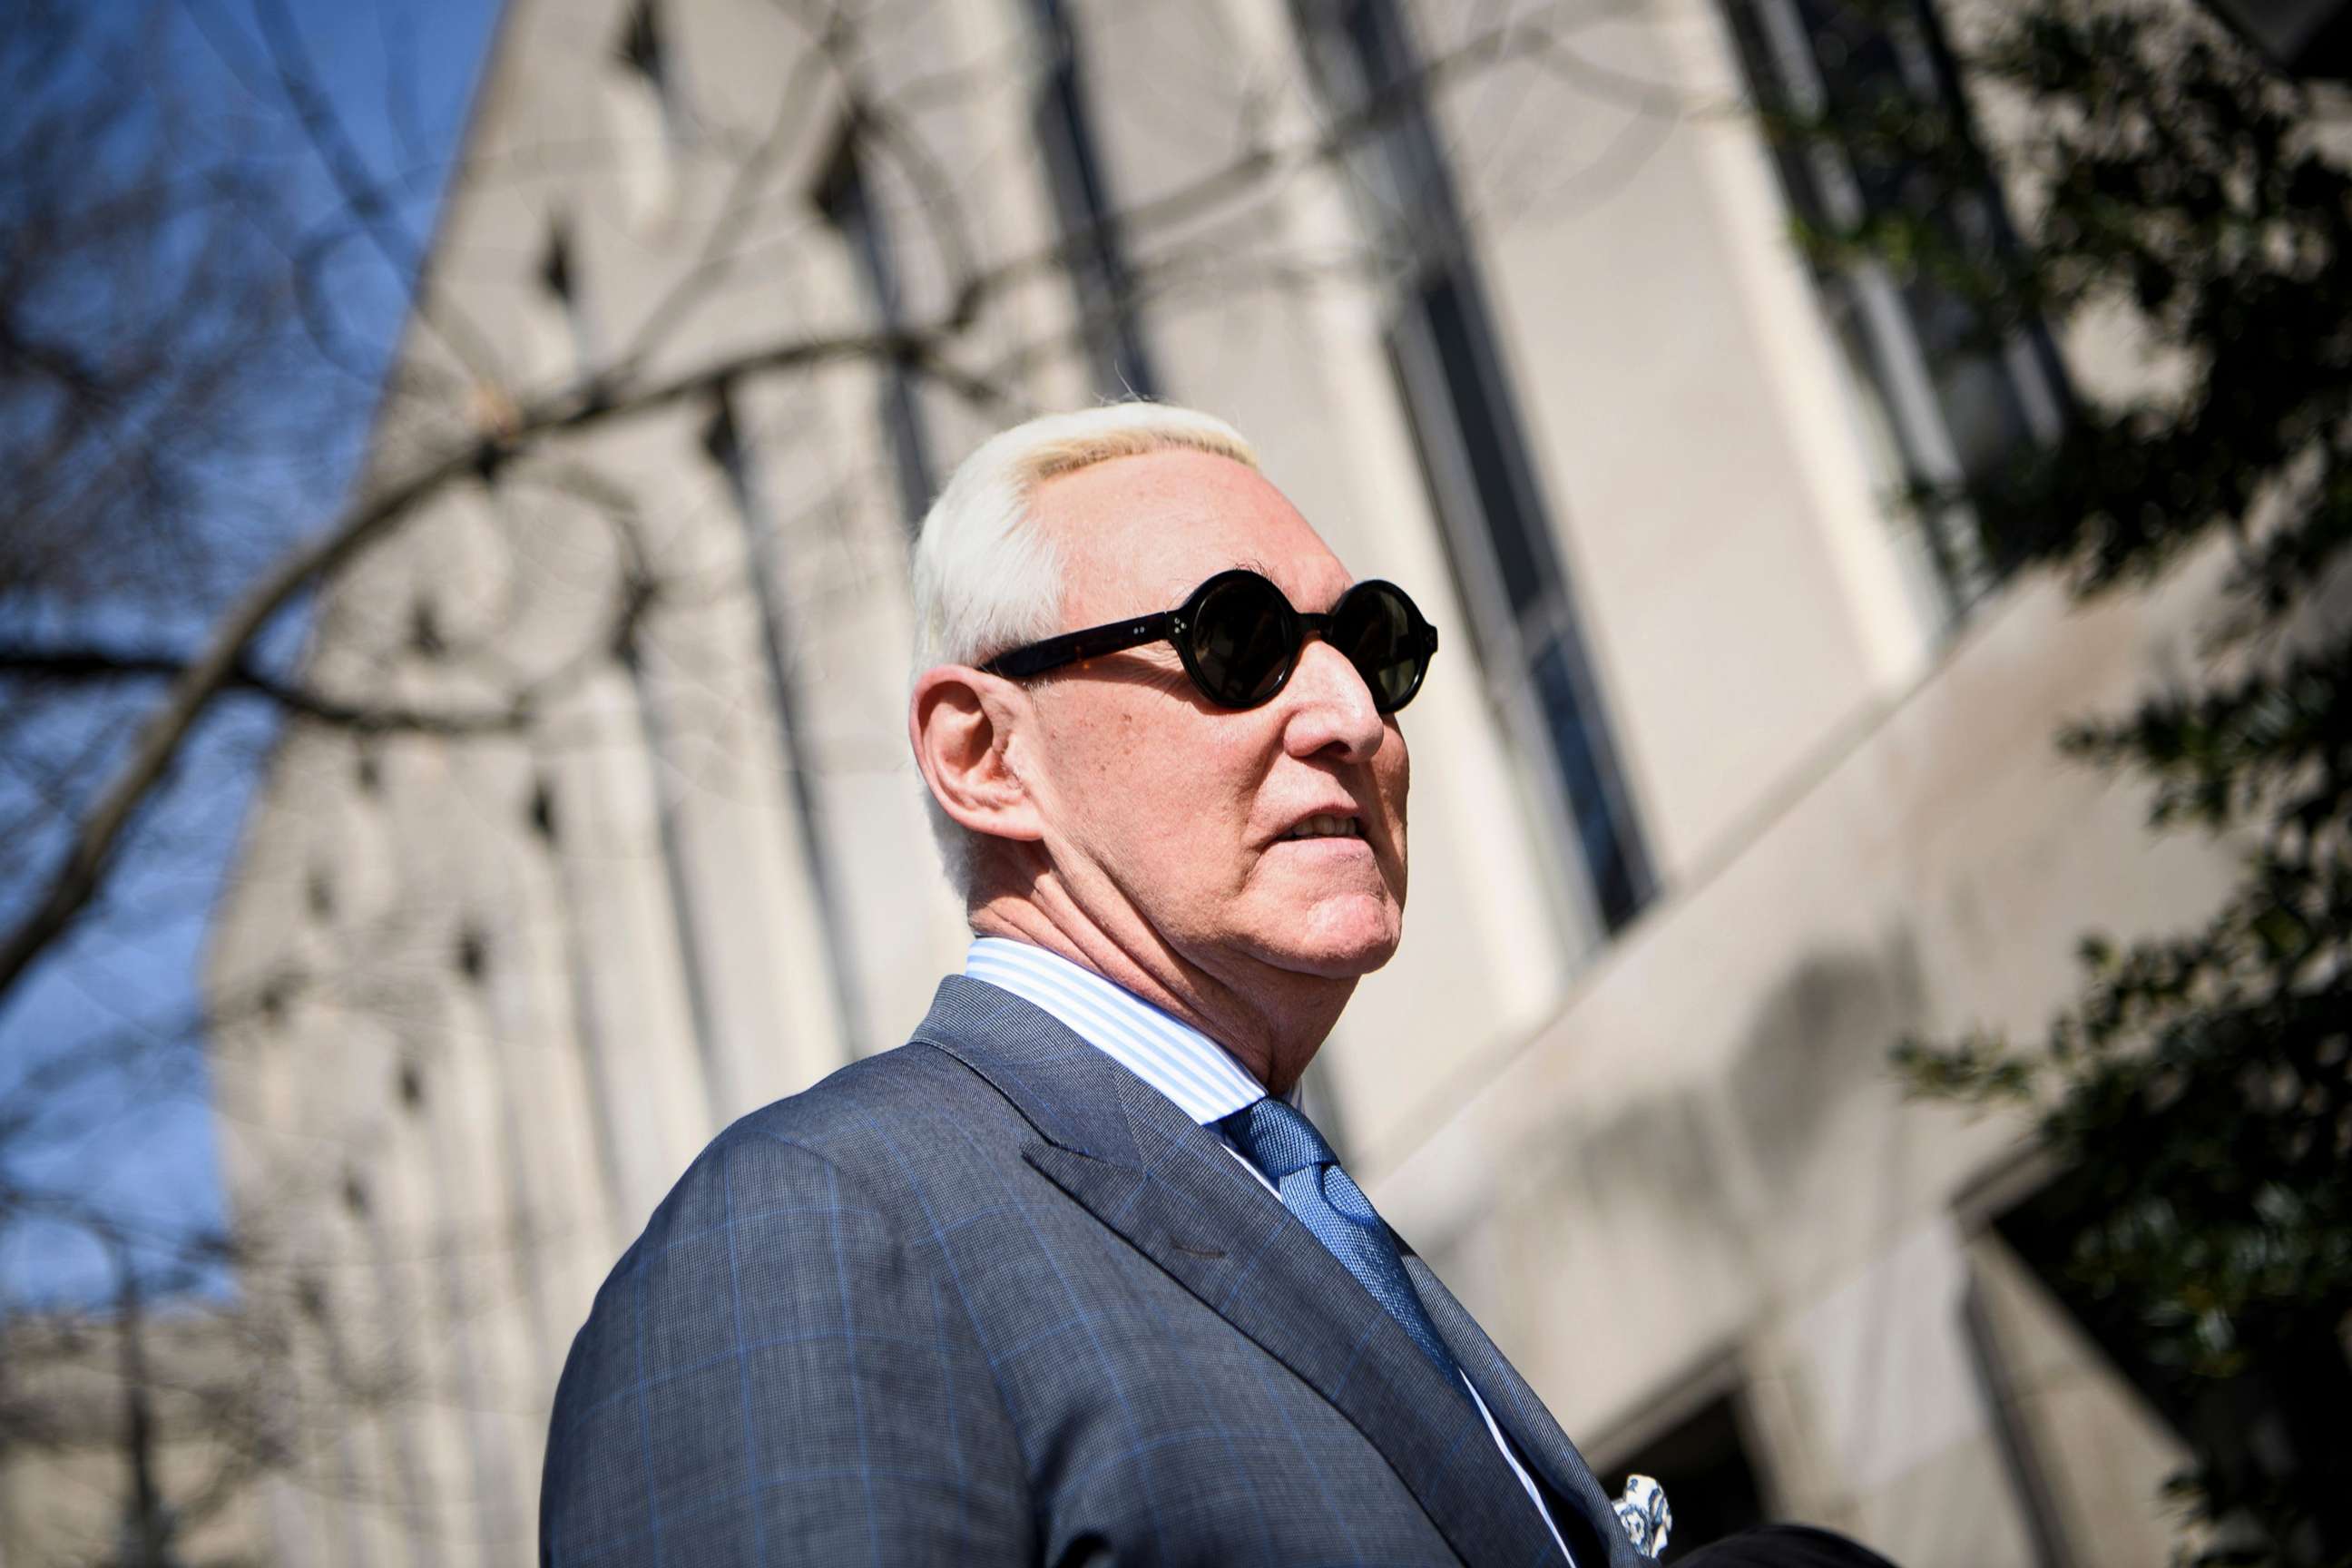 PHOTO: Former campaign advisor to President Donald Trump, Roger Stone, arrives at U.S. District Court, Feb. 21, 2019, in Washington, D.C.